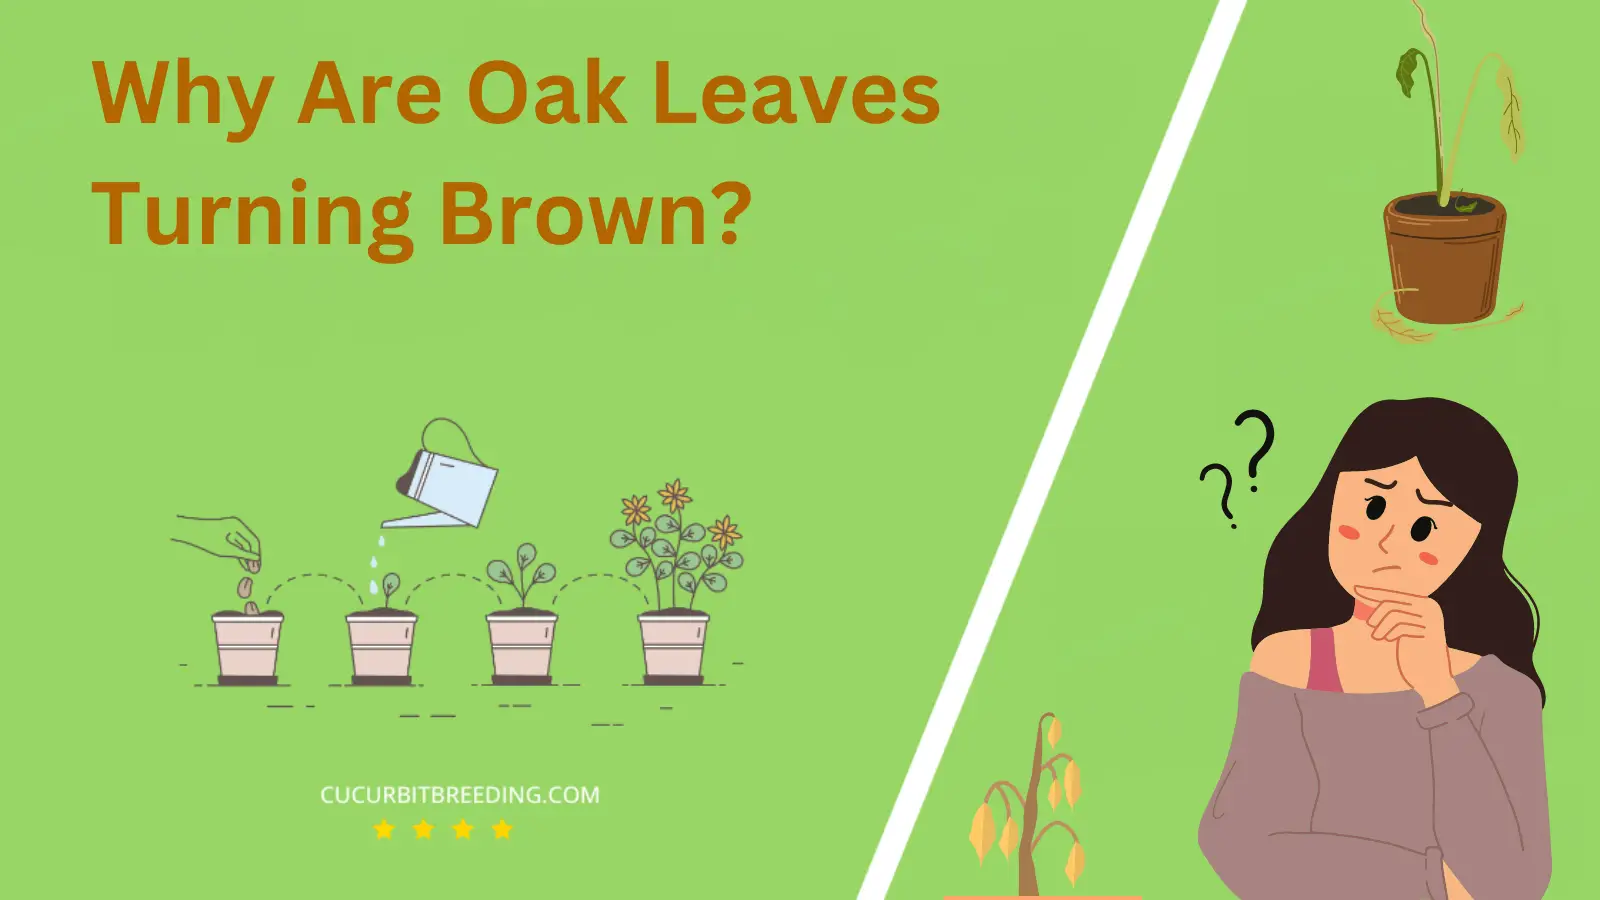 Why Are Oak Leaves Turning Brown